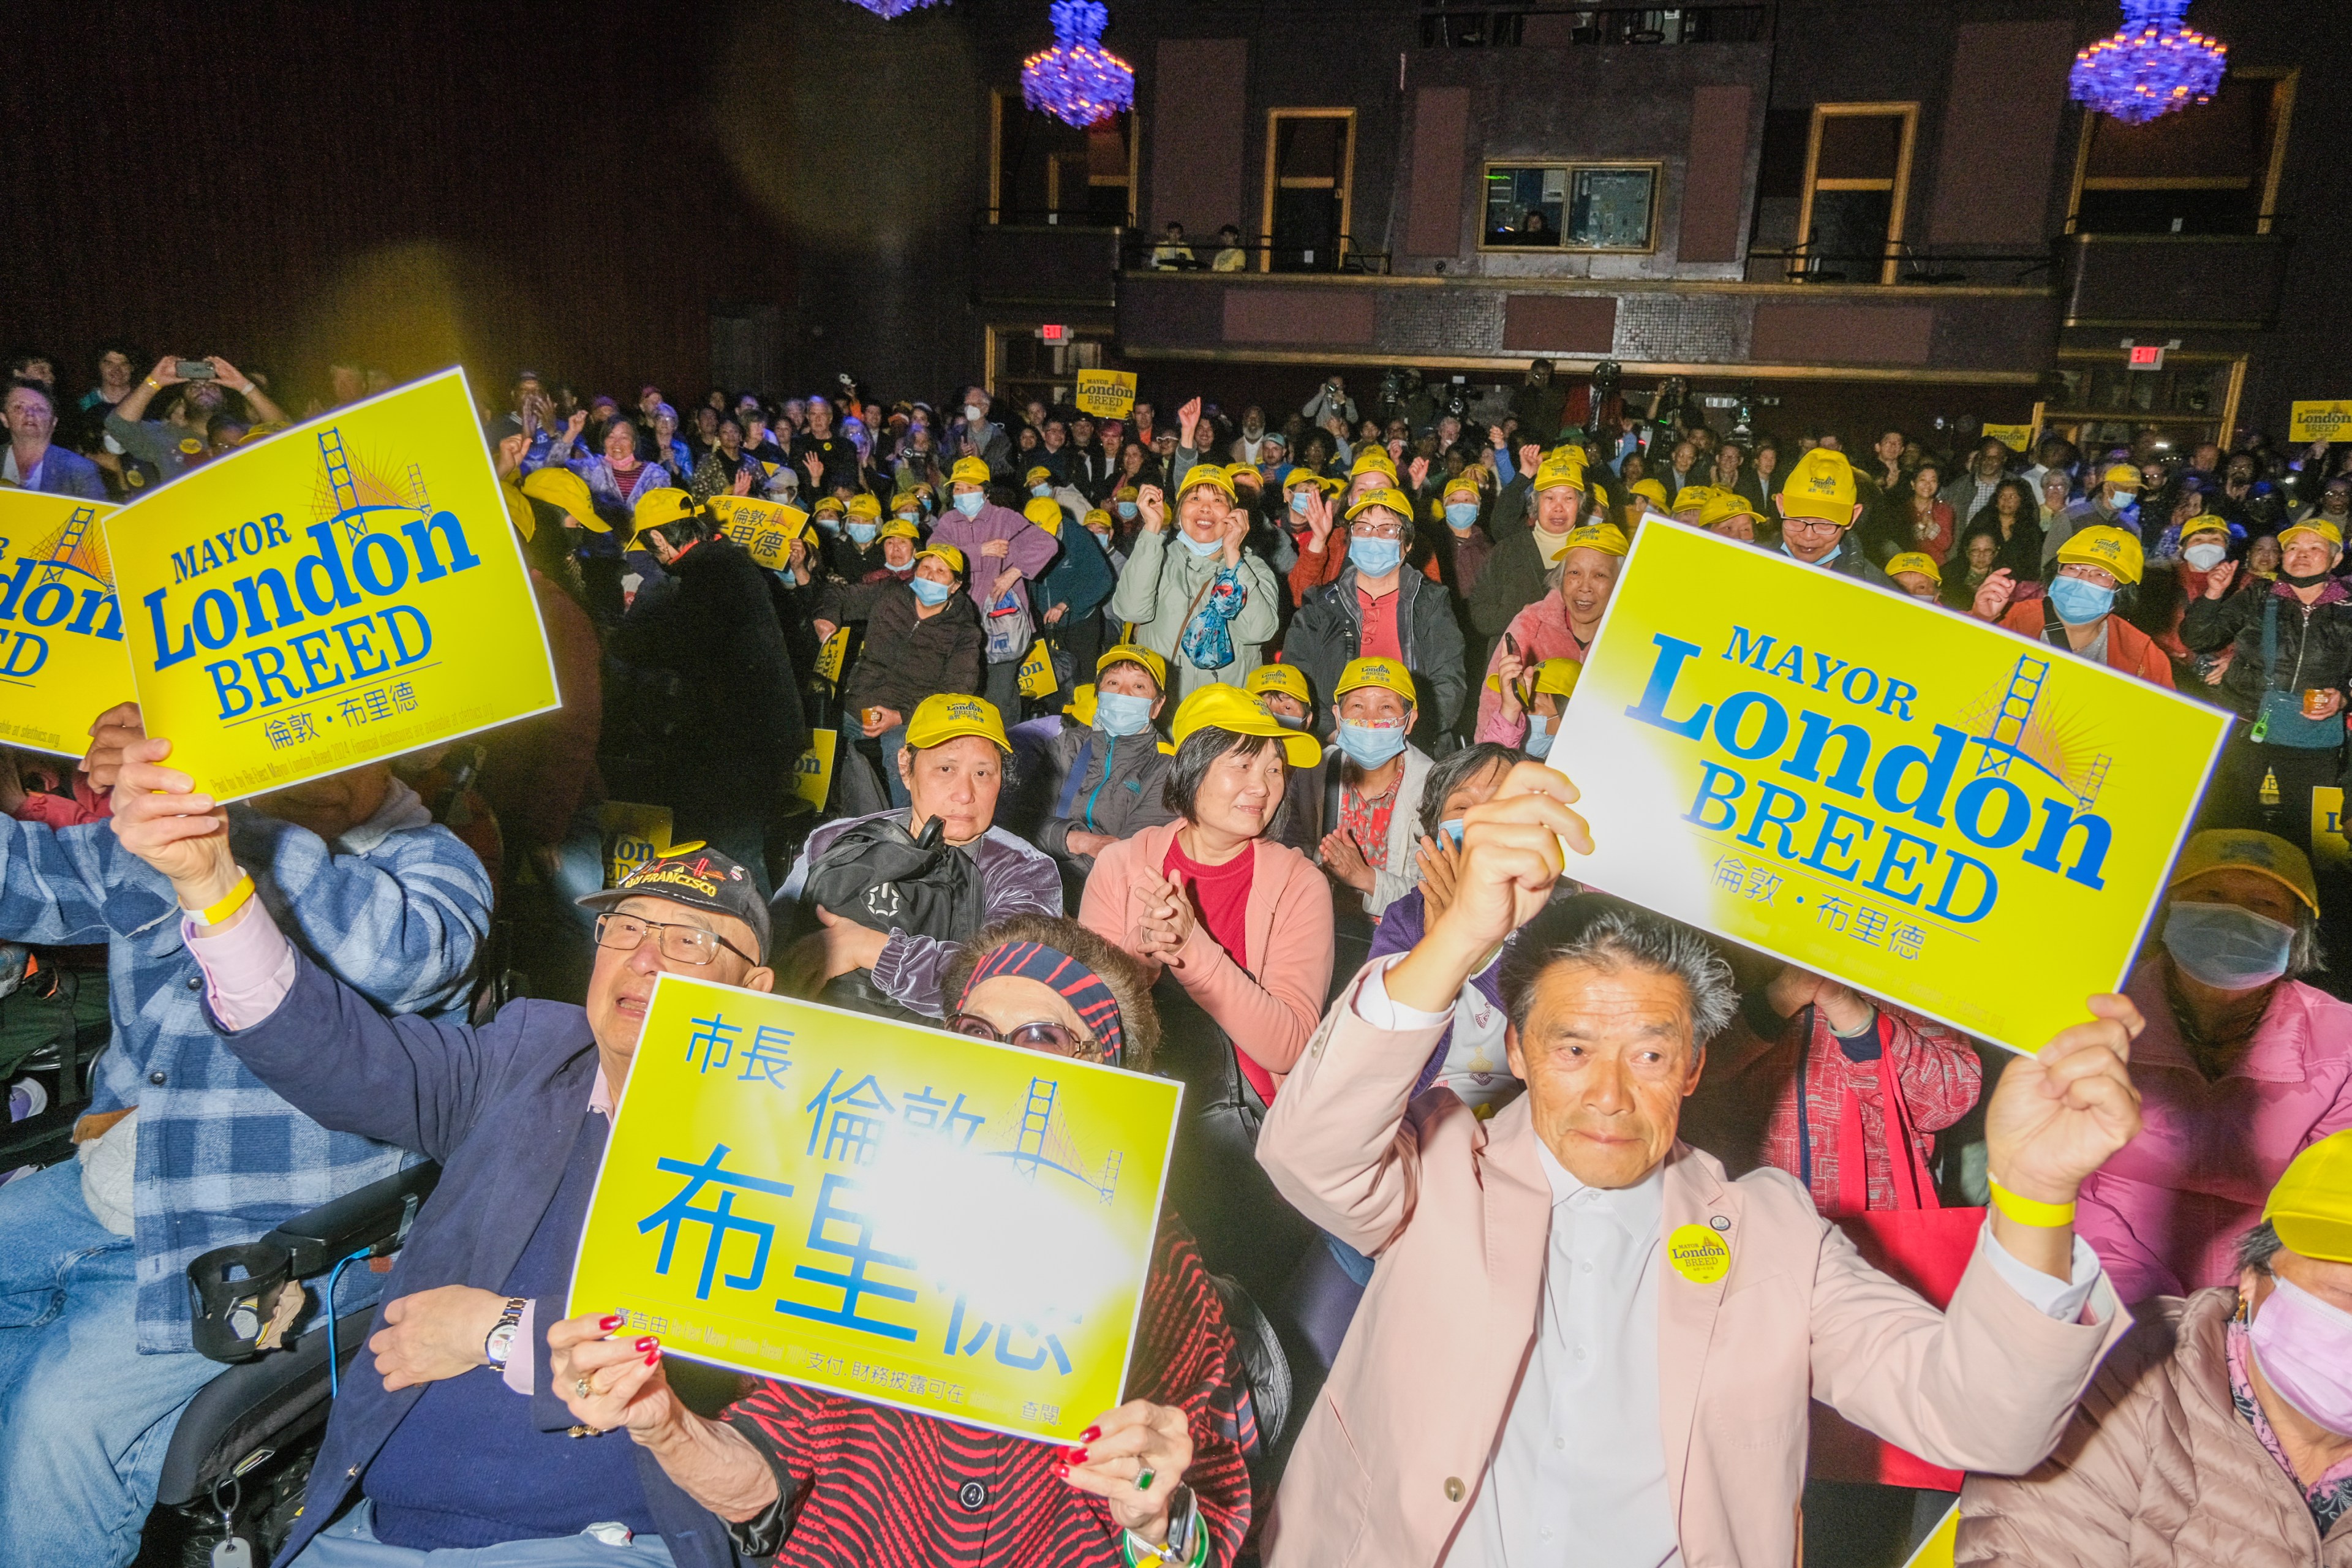 Crowd of people wearing yellow hats, holding yellow signs supporting Mayor London Breed, in a dimly lit room with joyful expressions.